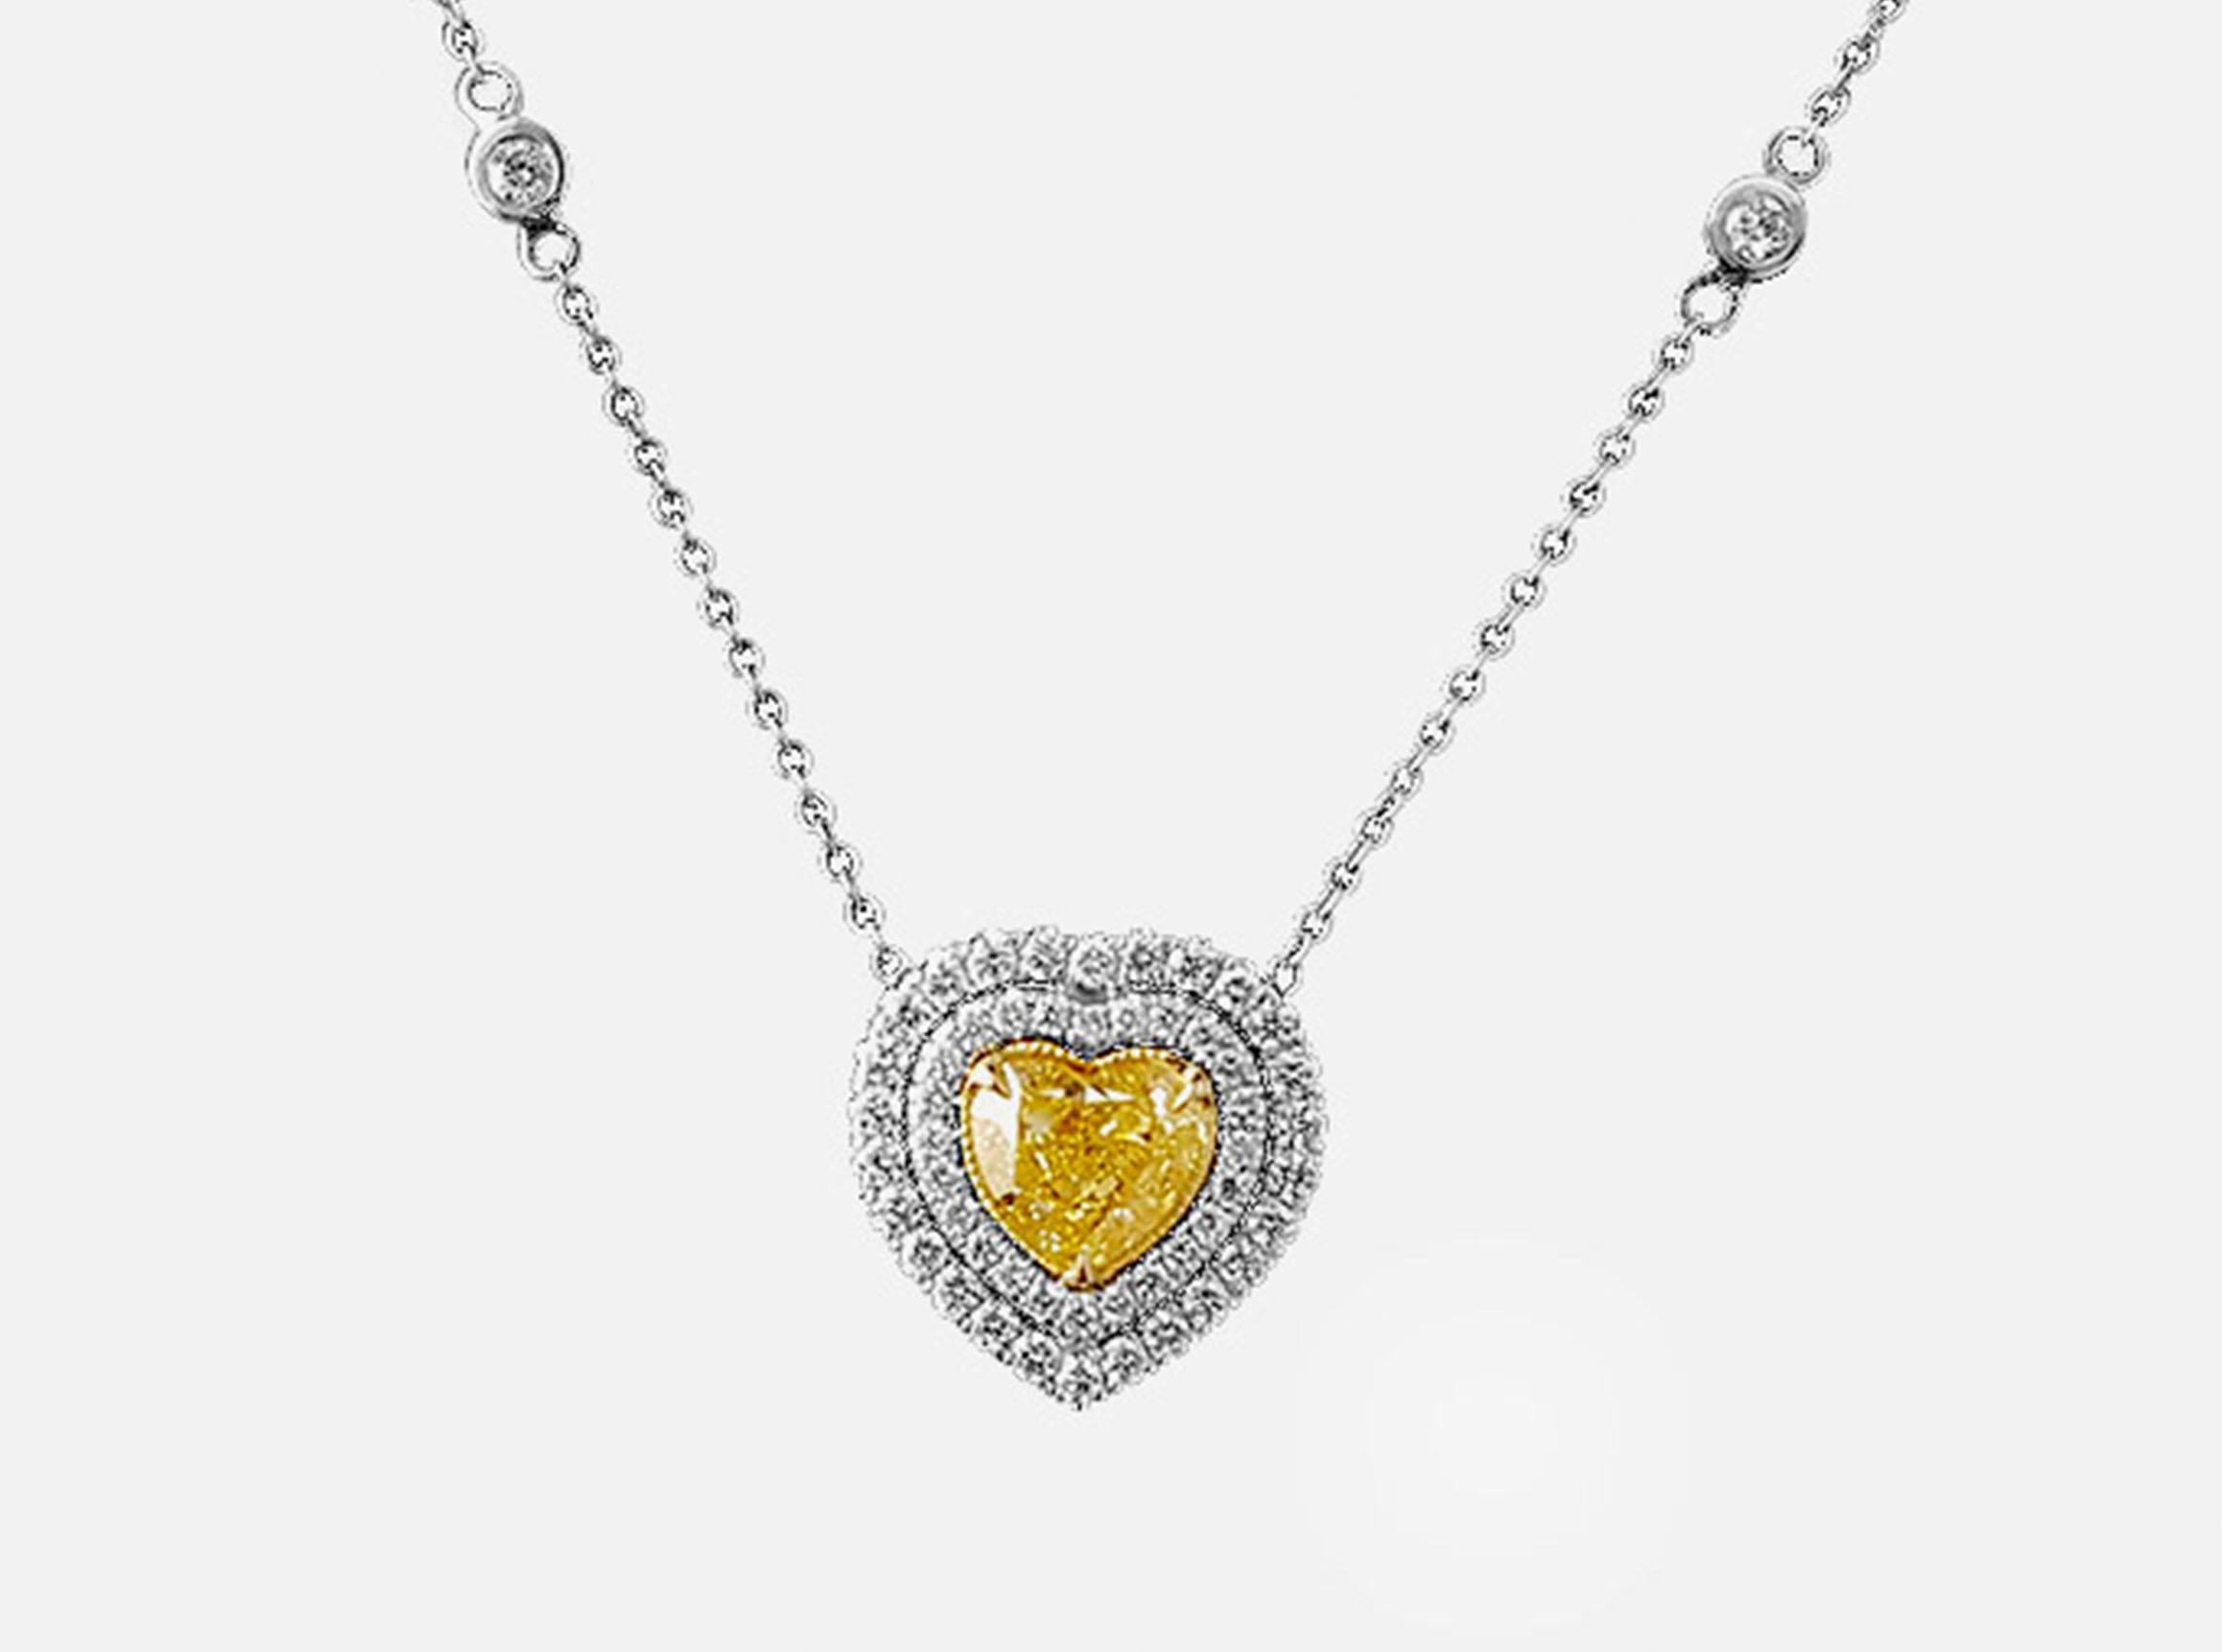 Introducing a stunning double Halo Pendant Necklace featuring a centerpiece of a GIA-certified 1.26 Carat Heart-shaped Fancy Yellow Diamond. This timeless design highlights the elegance of the central stone, enhanced by 56 surrounding round-cut